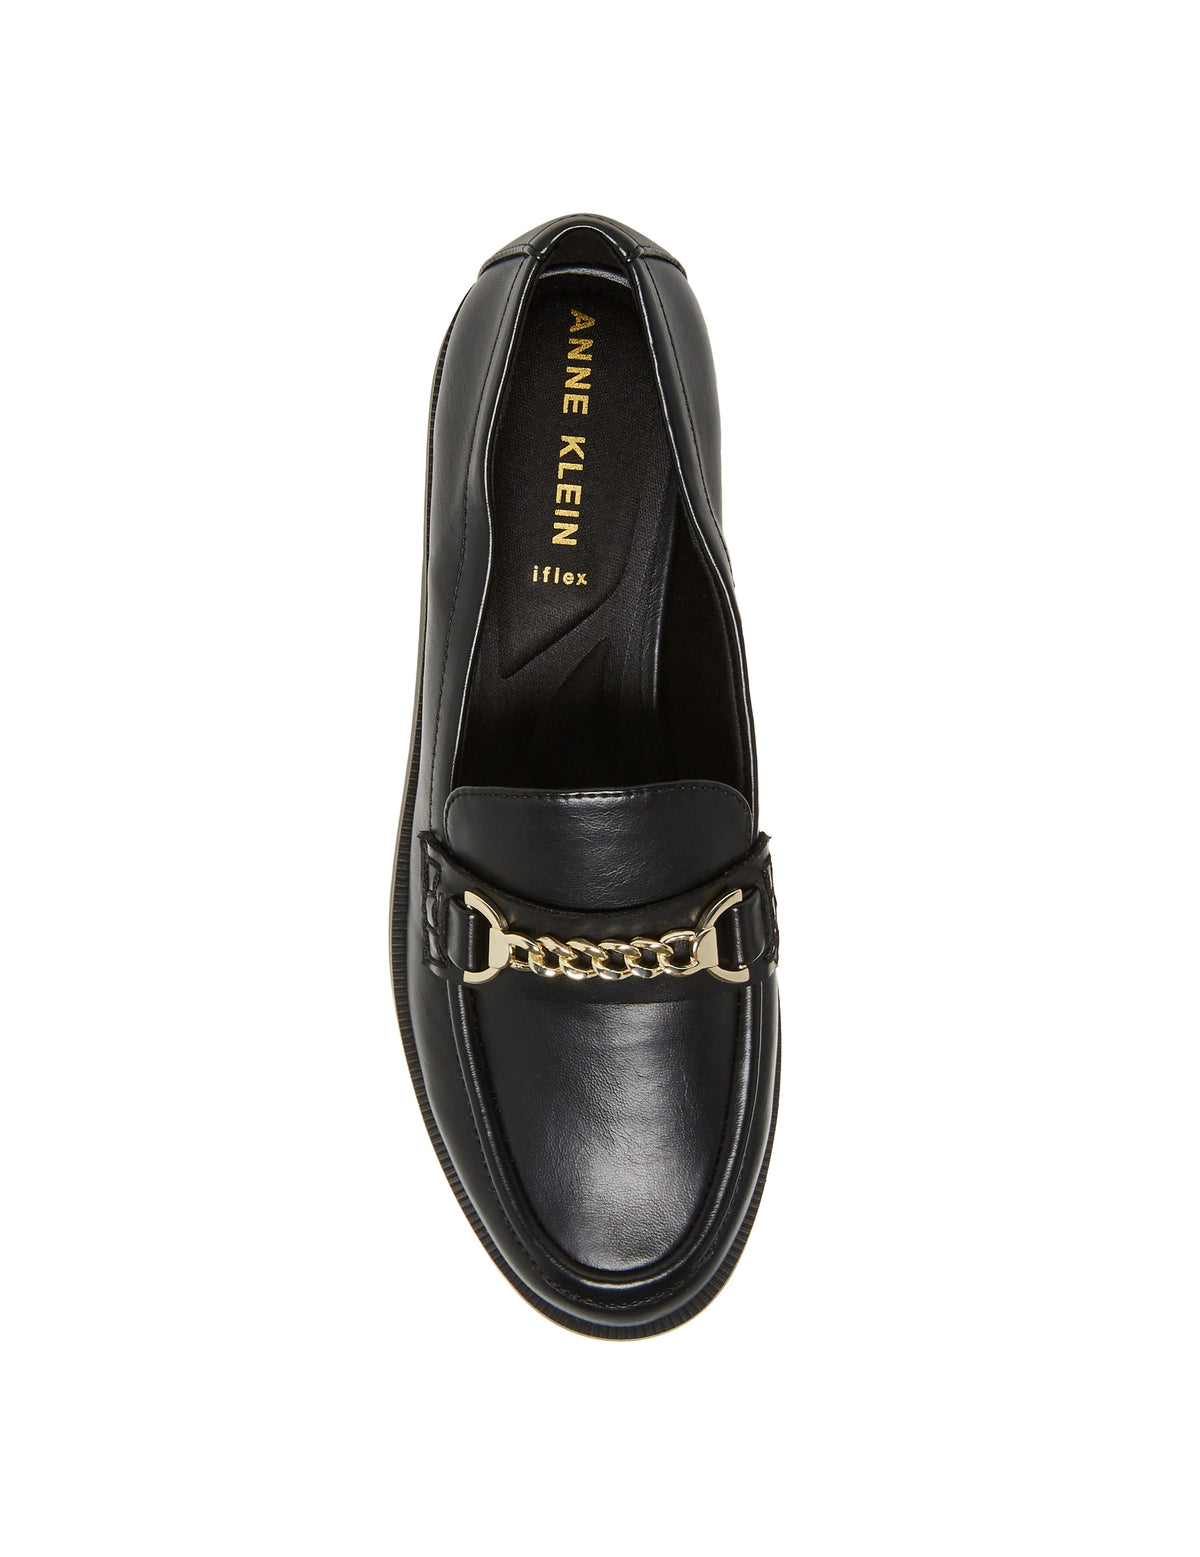 Anne Klein  Pastry Loafer